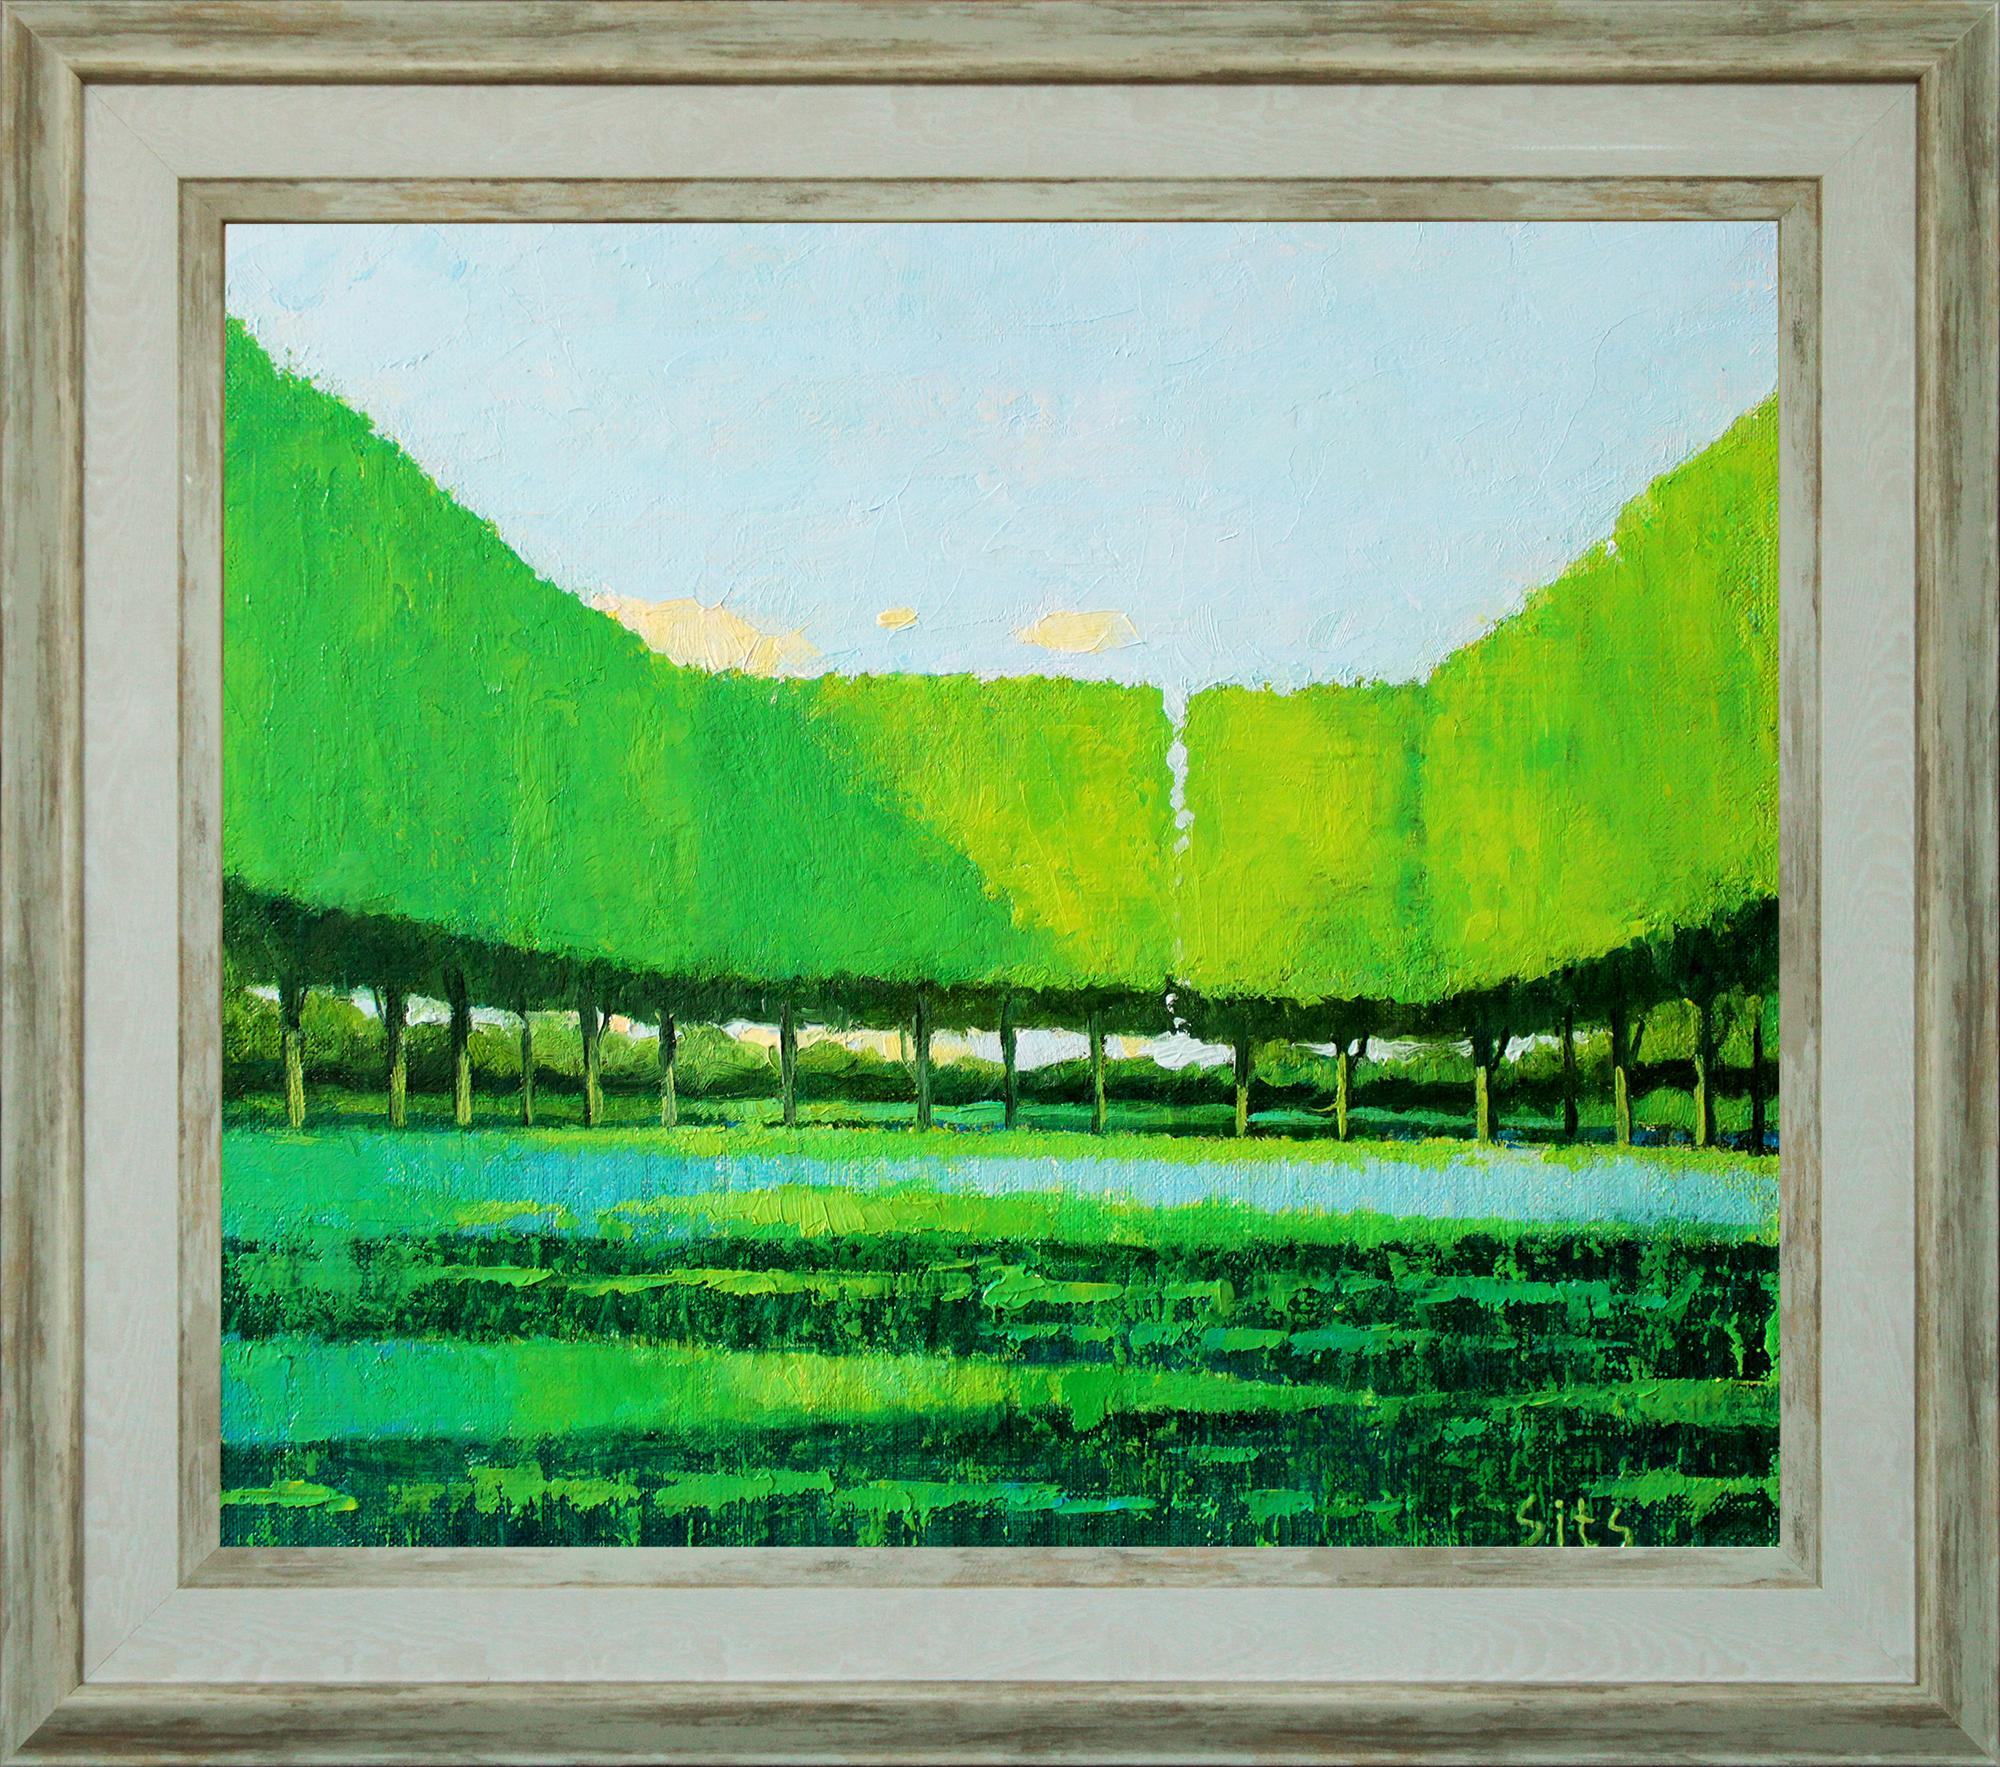 Modern, expressive summer landscape. Summer day in the city park. A quiet corner in the city center. (Grass) green, blue colors dominate the work.
• It is painted on canvas with high quality oil paints.
• The painting is framed. Ready to hang
•